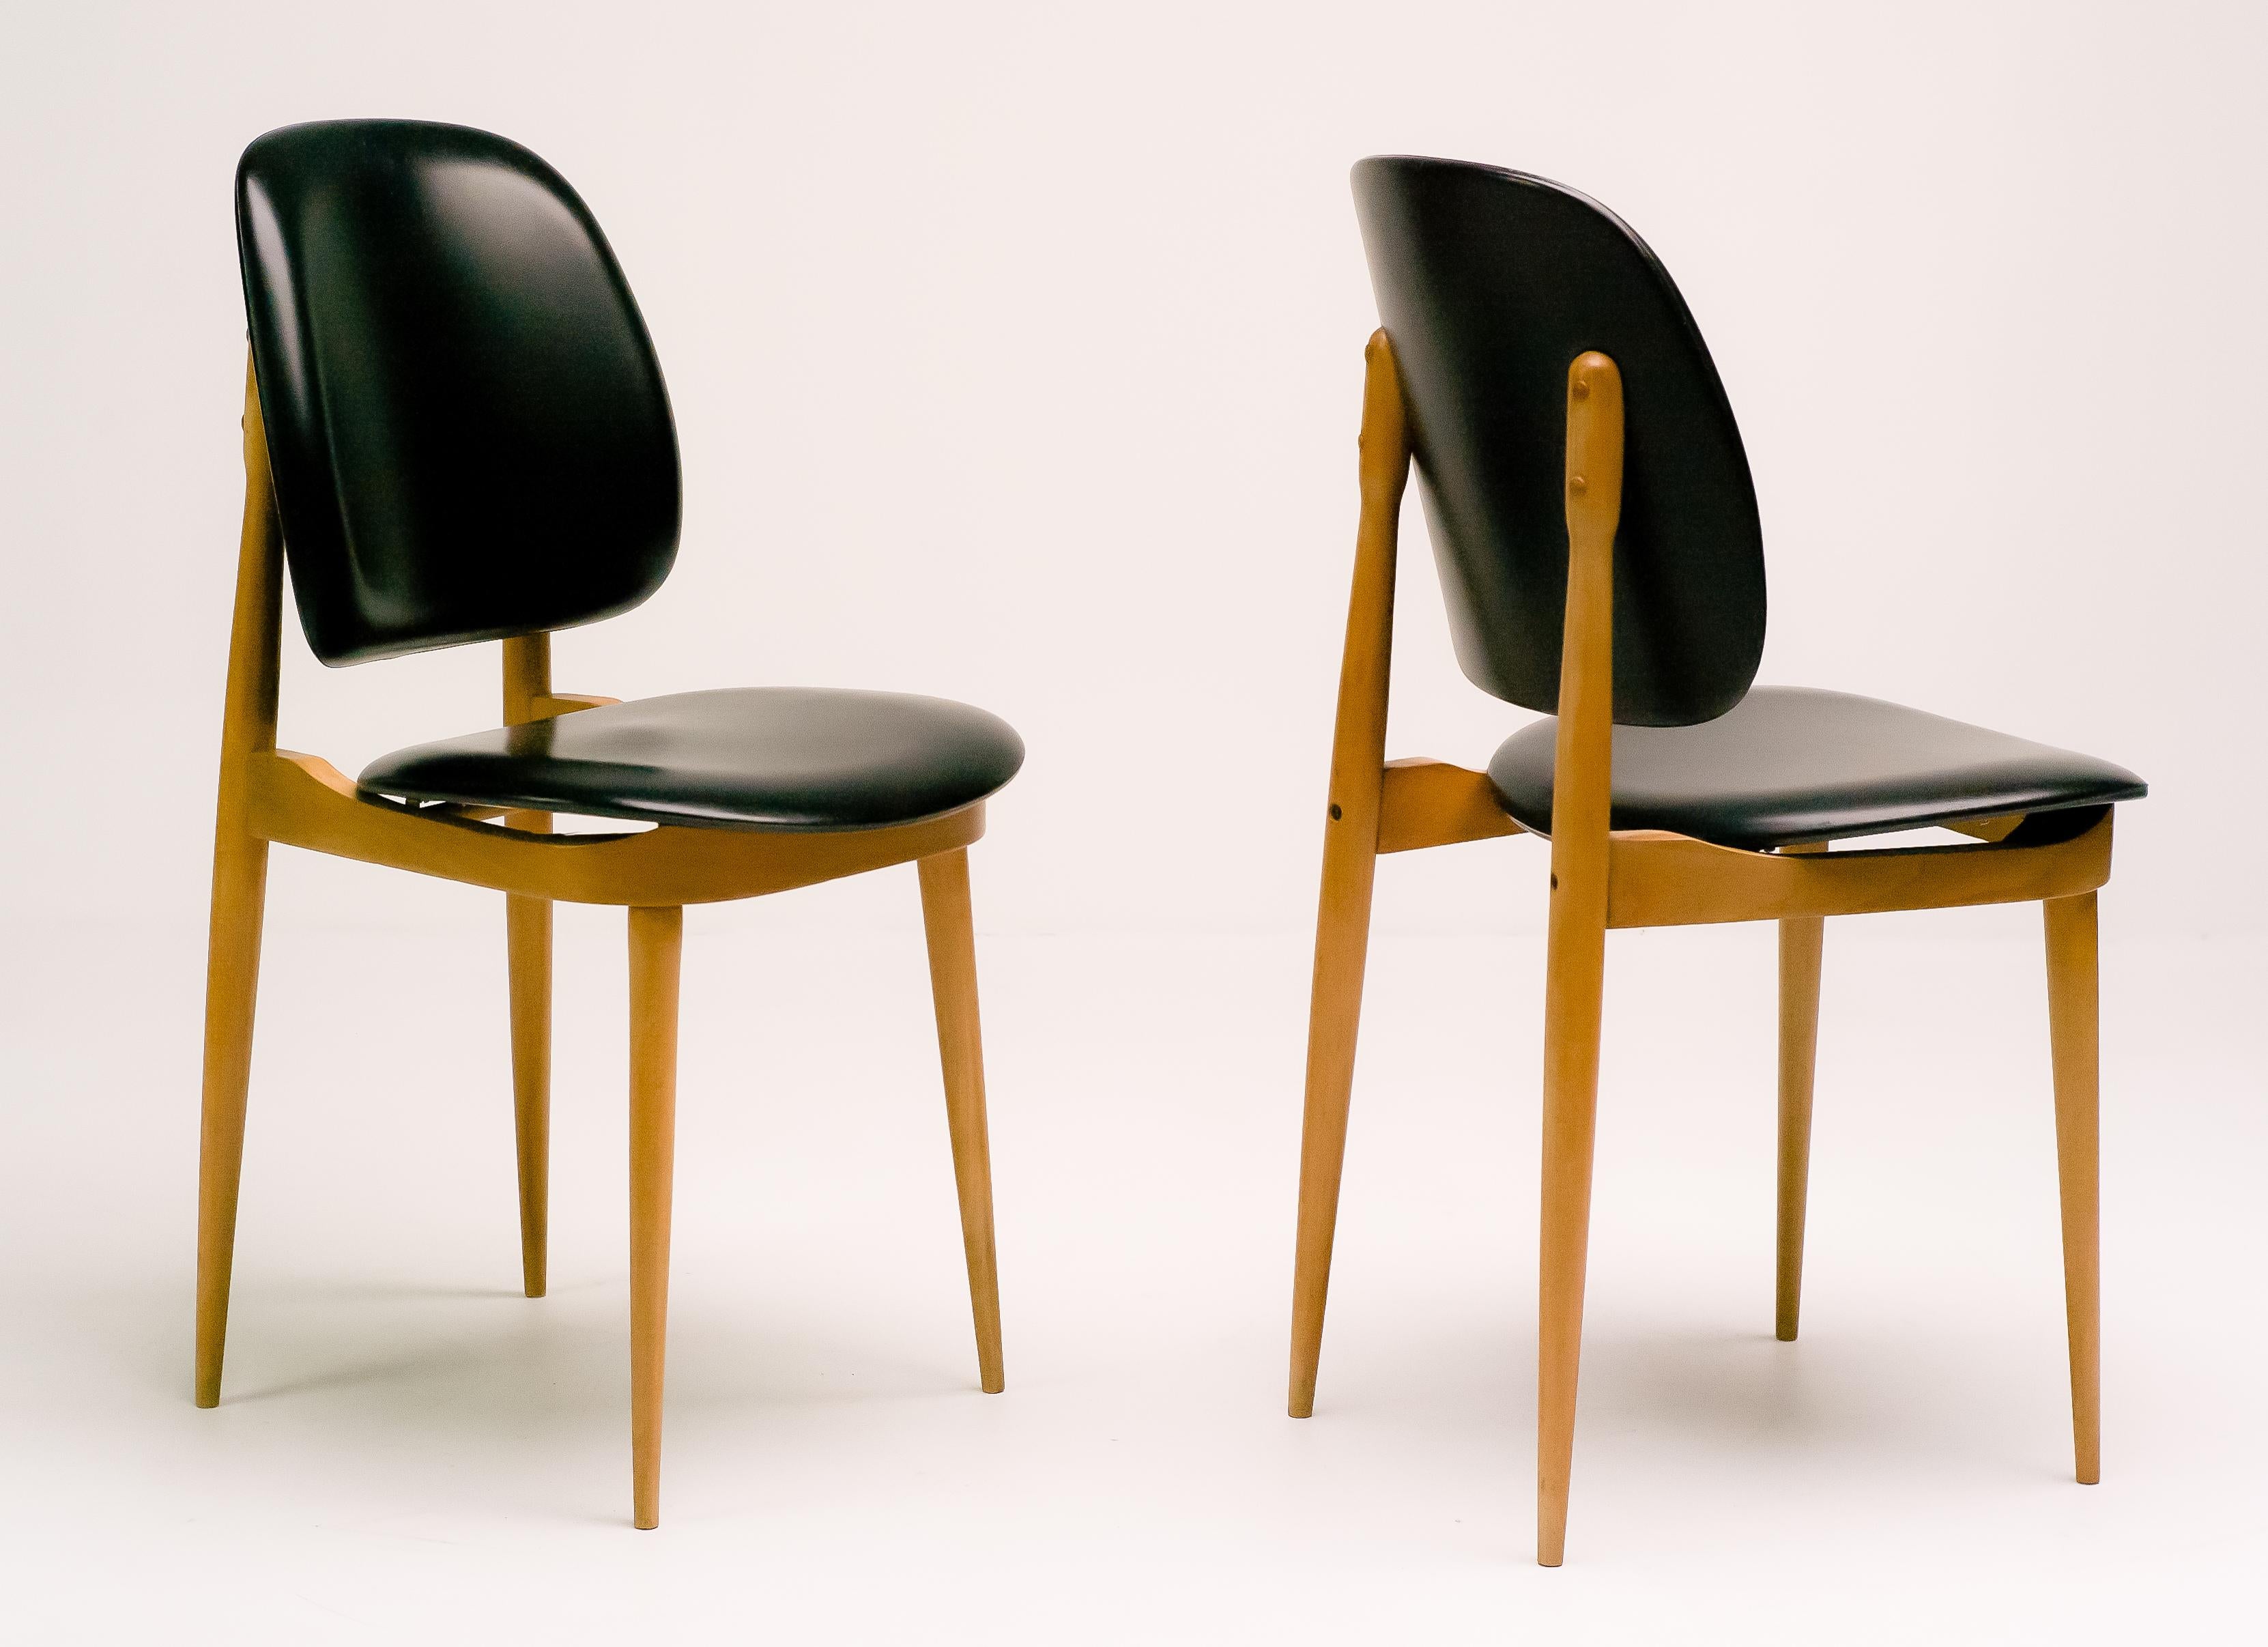 Pair of elegant chairs in maple and black vinyl.
Priced individually.